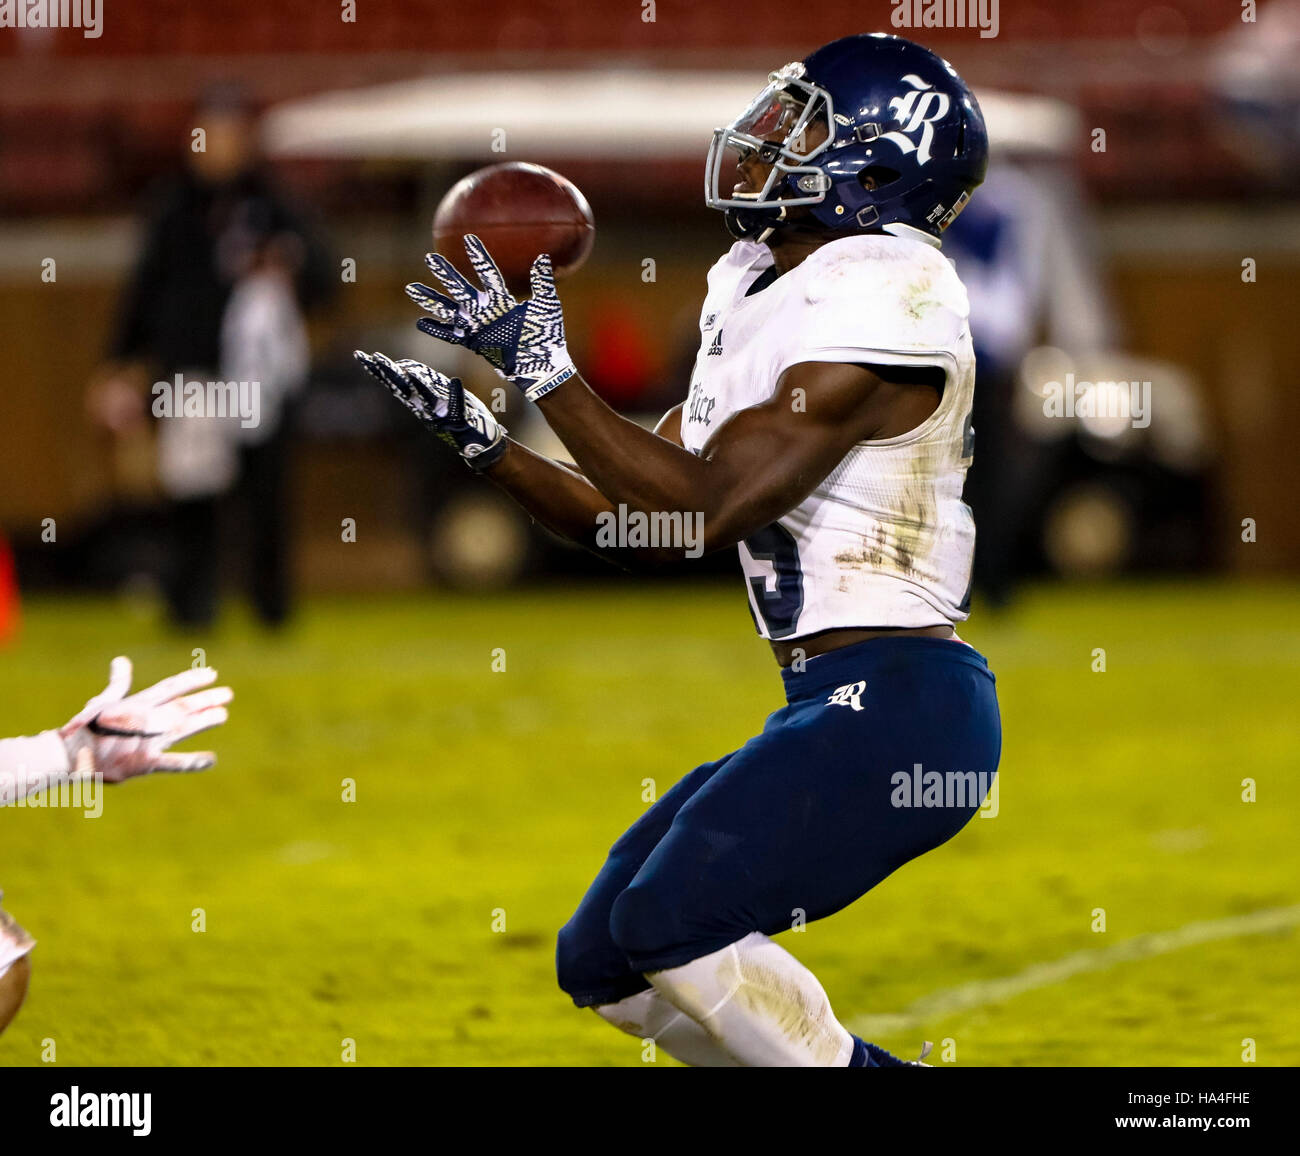 Palo Alto, California, USA. 26th Nov, 2016. Rice Running Back Nahshon Ellerbie (25) fields a punt in NCAA football action at Stanford University, featuring the Rice Owls visiting the Stanford Cardinal. Stanford won the game 41-17. © Seth Riskin/ZUMA Wire/Alamy Live News Stock Photo